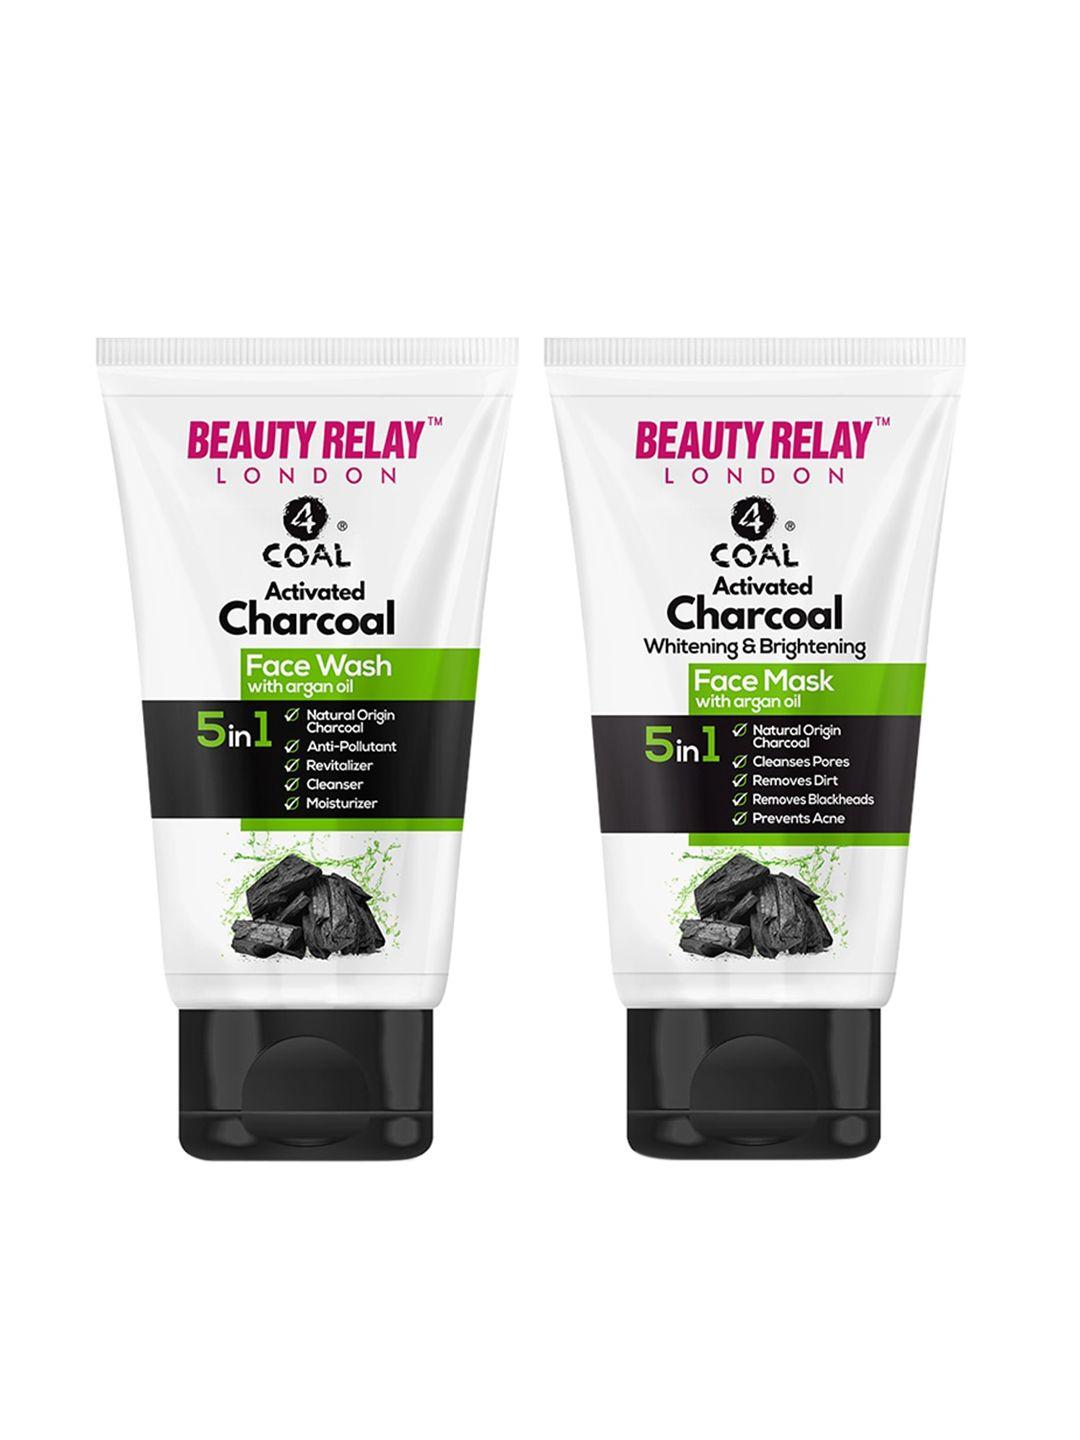 beautyrelay london 4coal activated charcoal face wash & face mask - 200ml buy 1 get 1 free